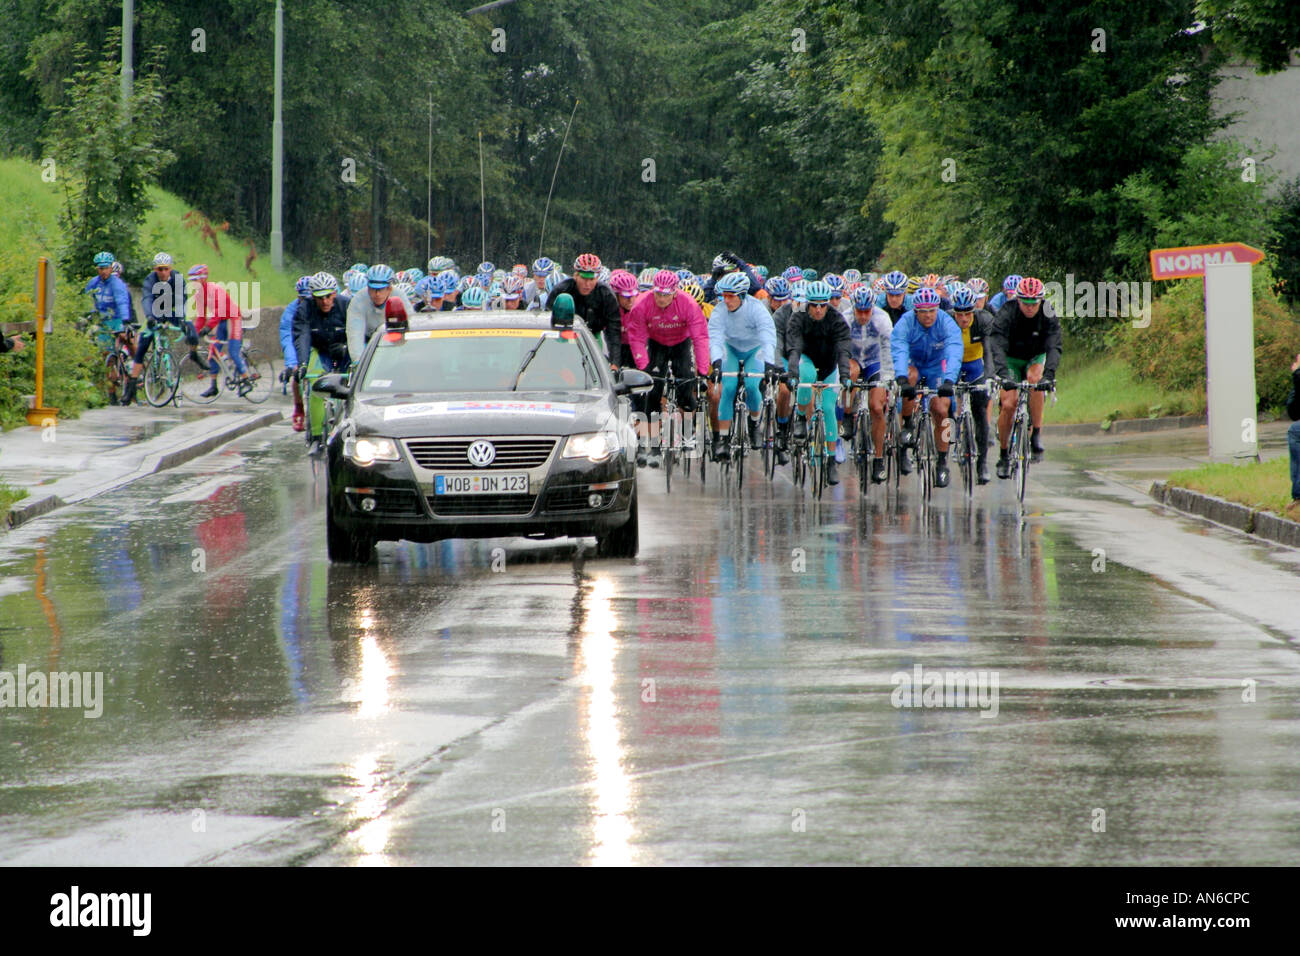 Starting line following car at professional bicycle race German Tour 2006 Bad Toelz Bavaria Germany Stock Photo